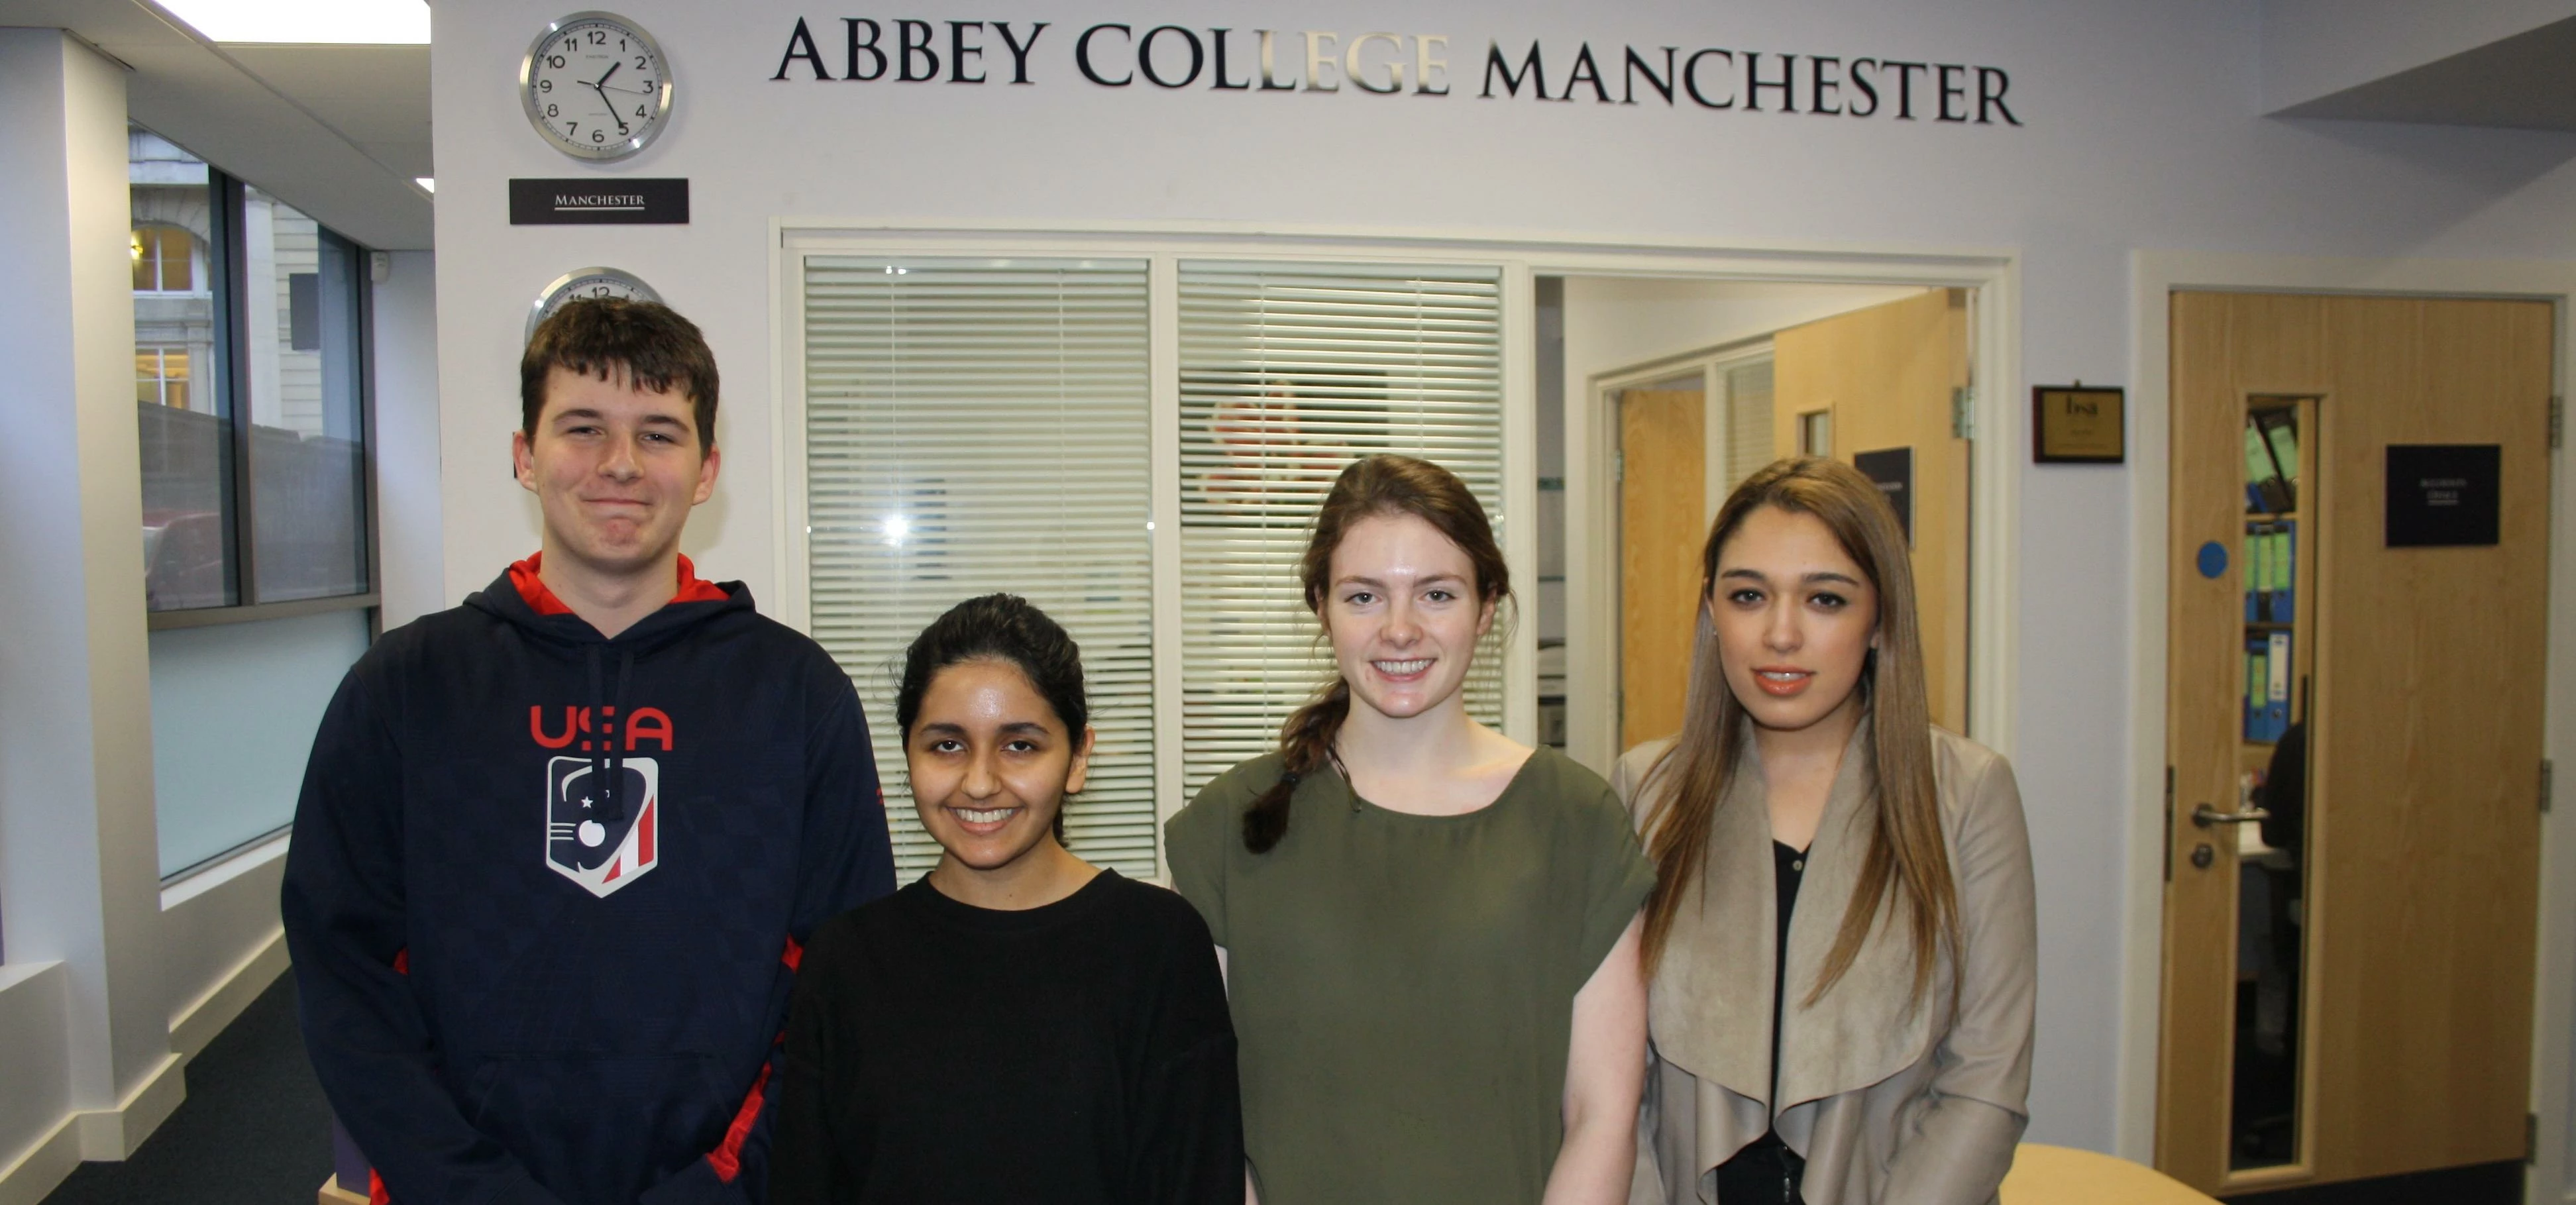 Medical Hopefuls at Abbey College Manchester